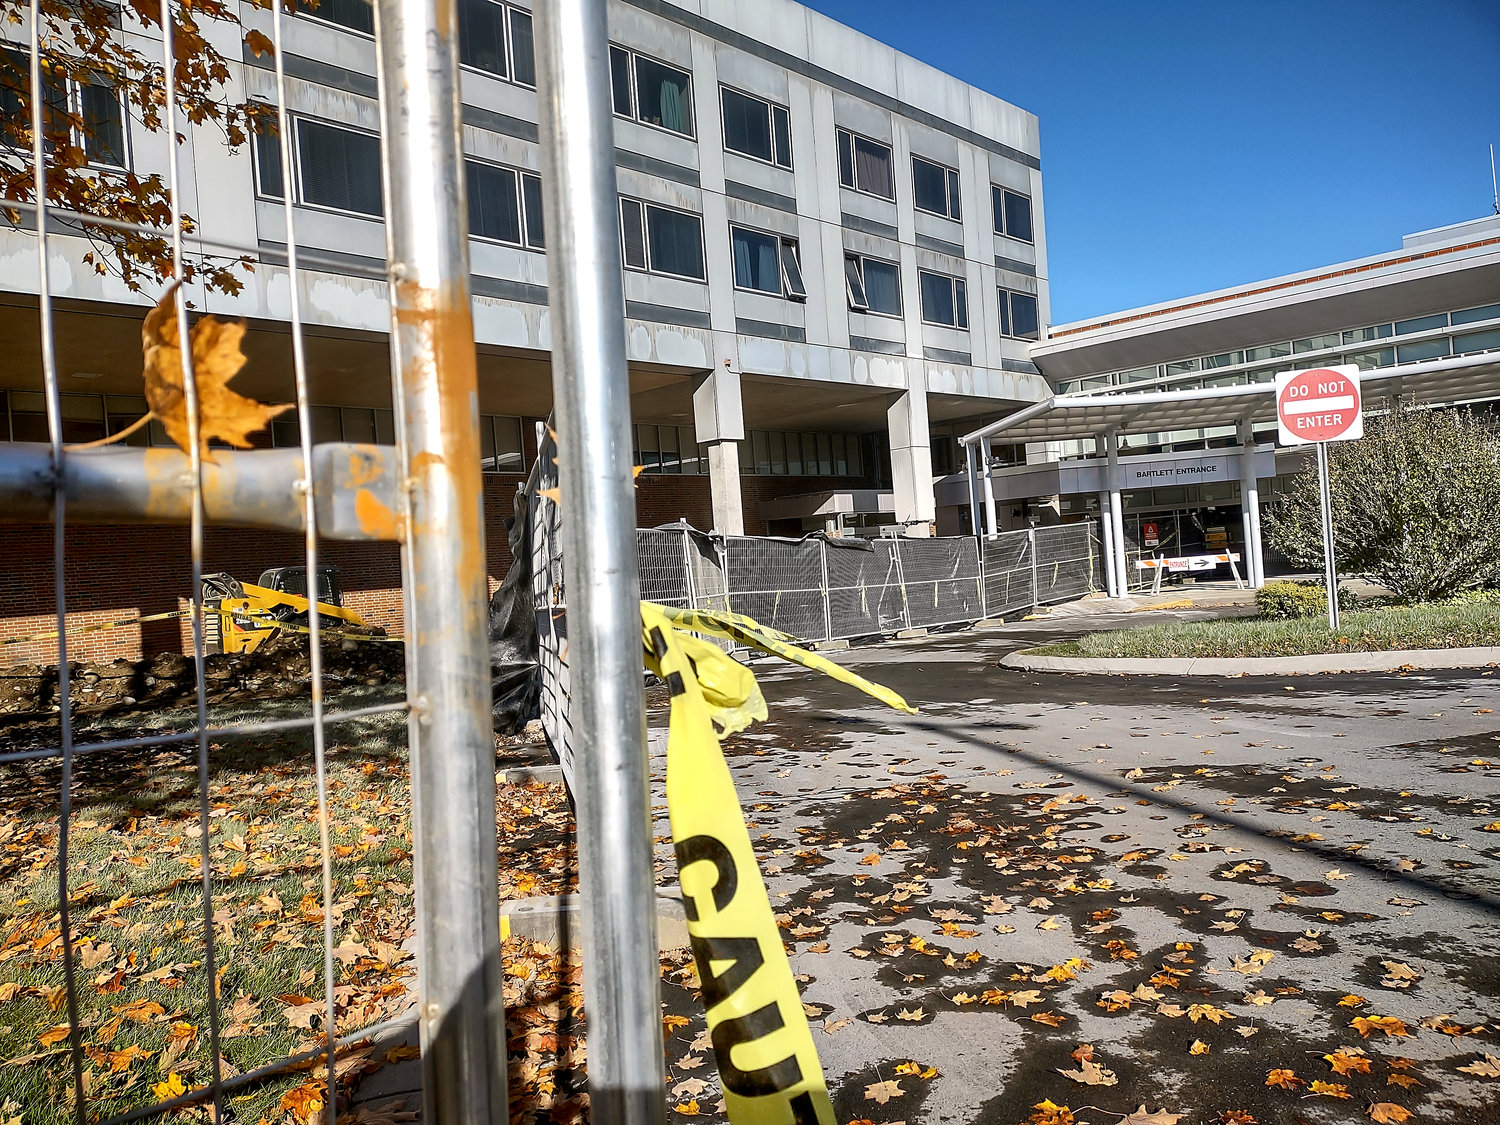 MAKING CHANGES — Demolition is underway at Rome Health to make way for a new Physician Centerwhich will bring together primary care, specialists, diagnostic testing and pharmacy in one location for patient convenience.